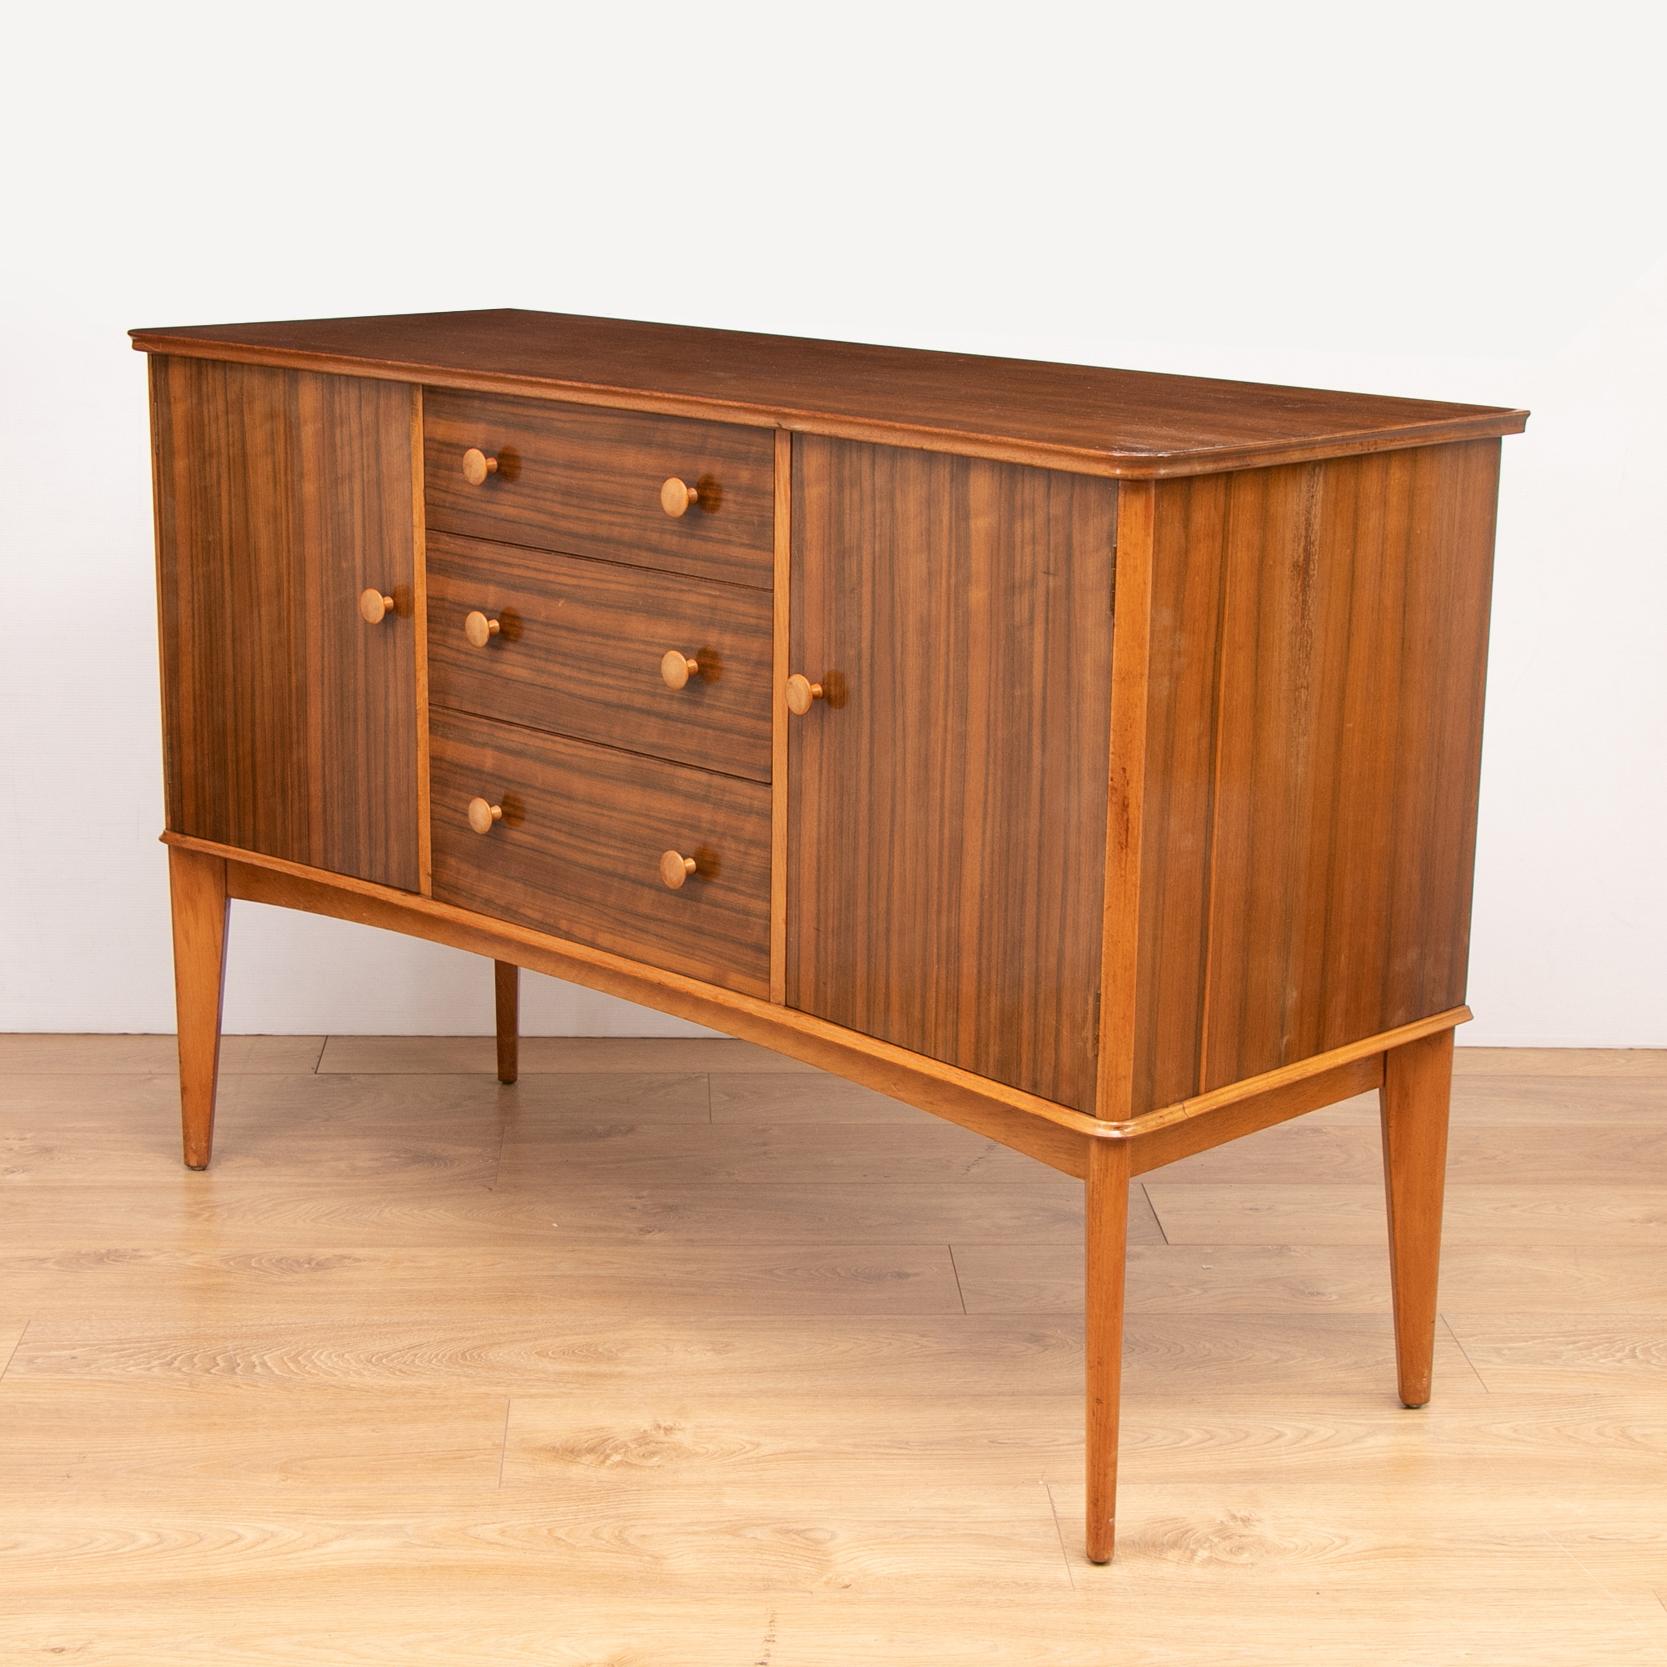 A midcentury rosewood sideboard by Gordon Russell Ltd, England, 1955. The sideboard contains three drawers and three storage compartments. The sideboard was bought as wedding present in 1955 from Bourne & Hollingsworth department store on Oxford